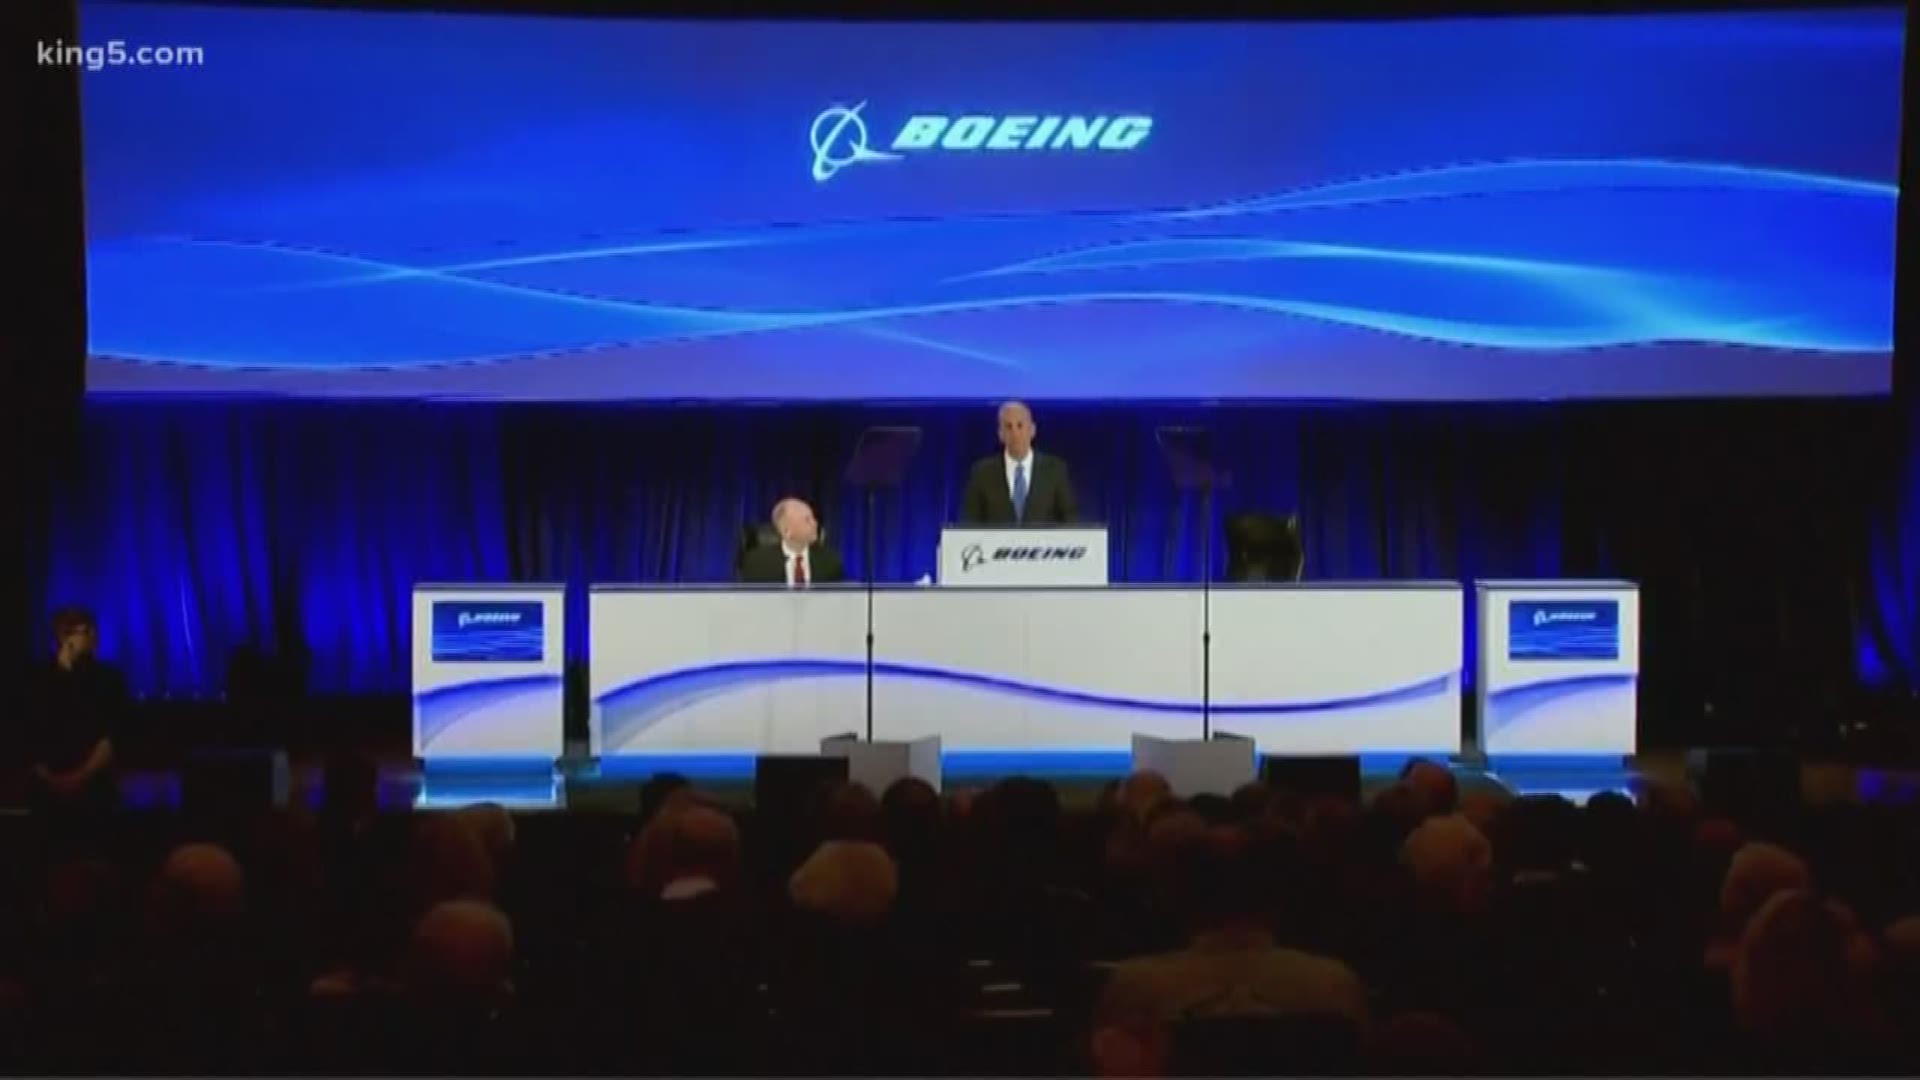 The atmosphere inside Boeing’s annual stockholders’ meeting was serious, as the company’s chairman and CEO Dennis Muilenburg promised to make the 737 MAX the safest airplane in the sky’s.